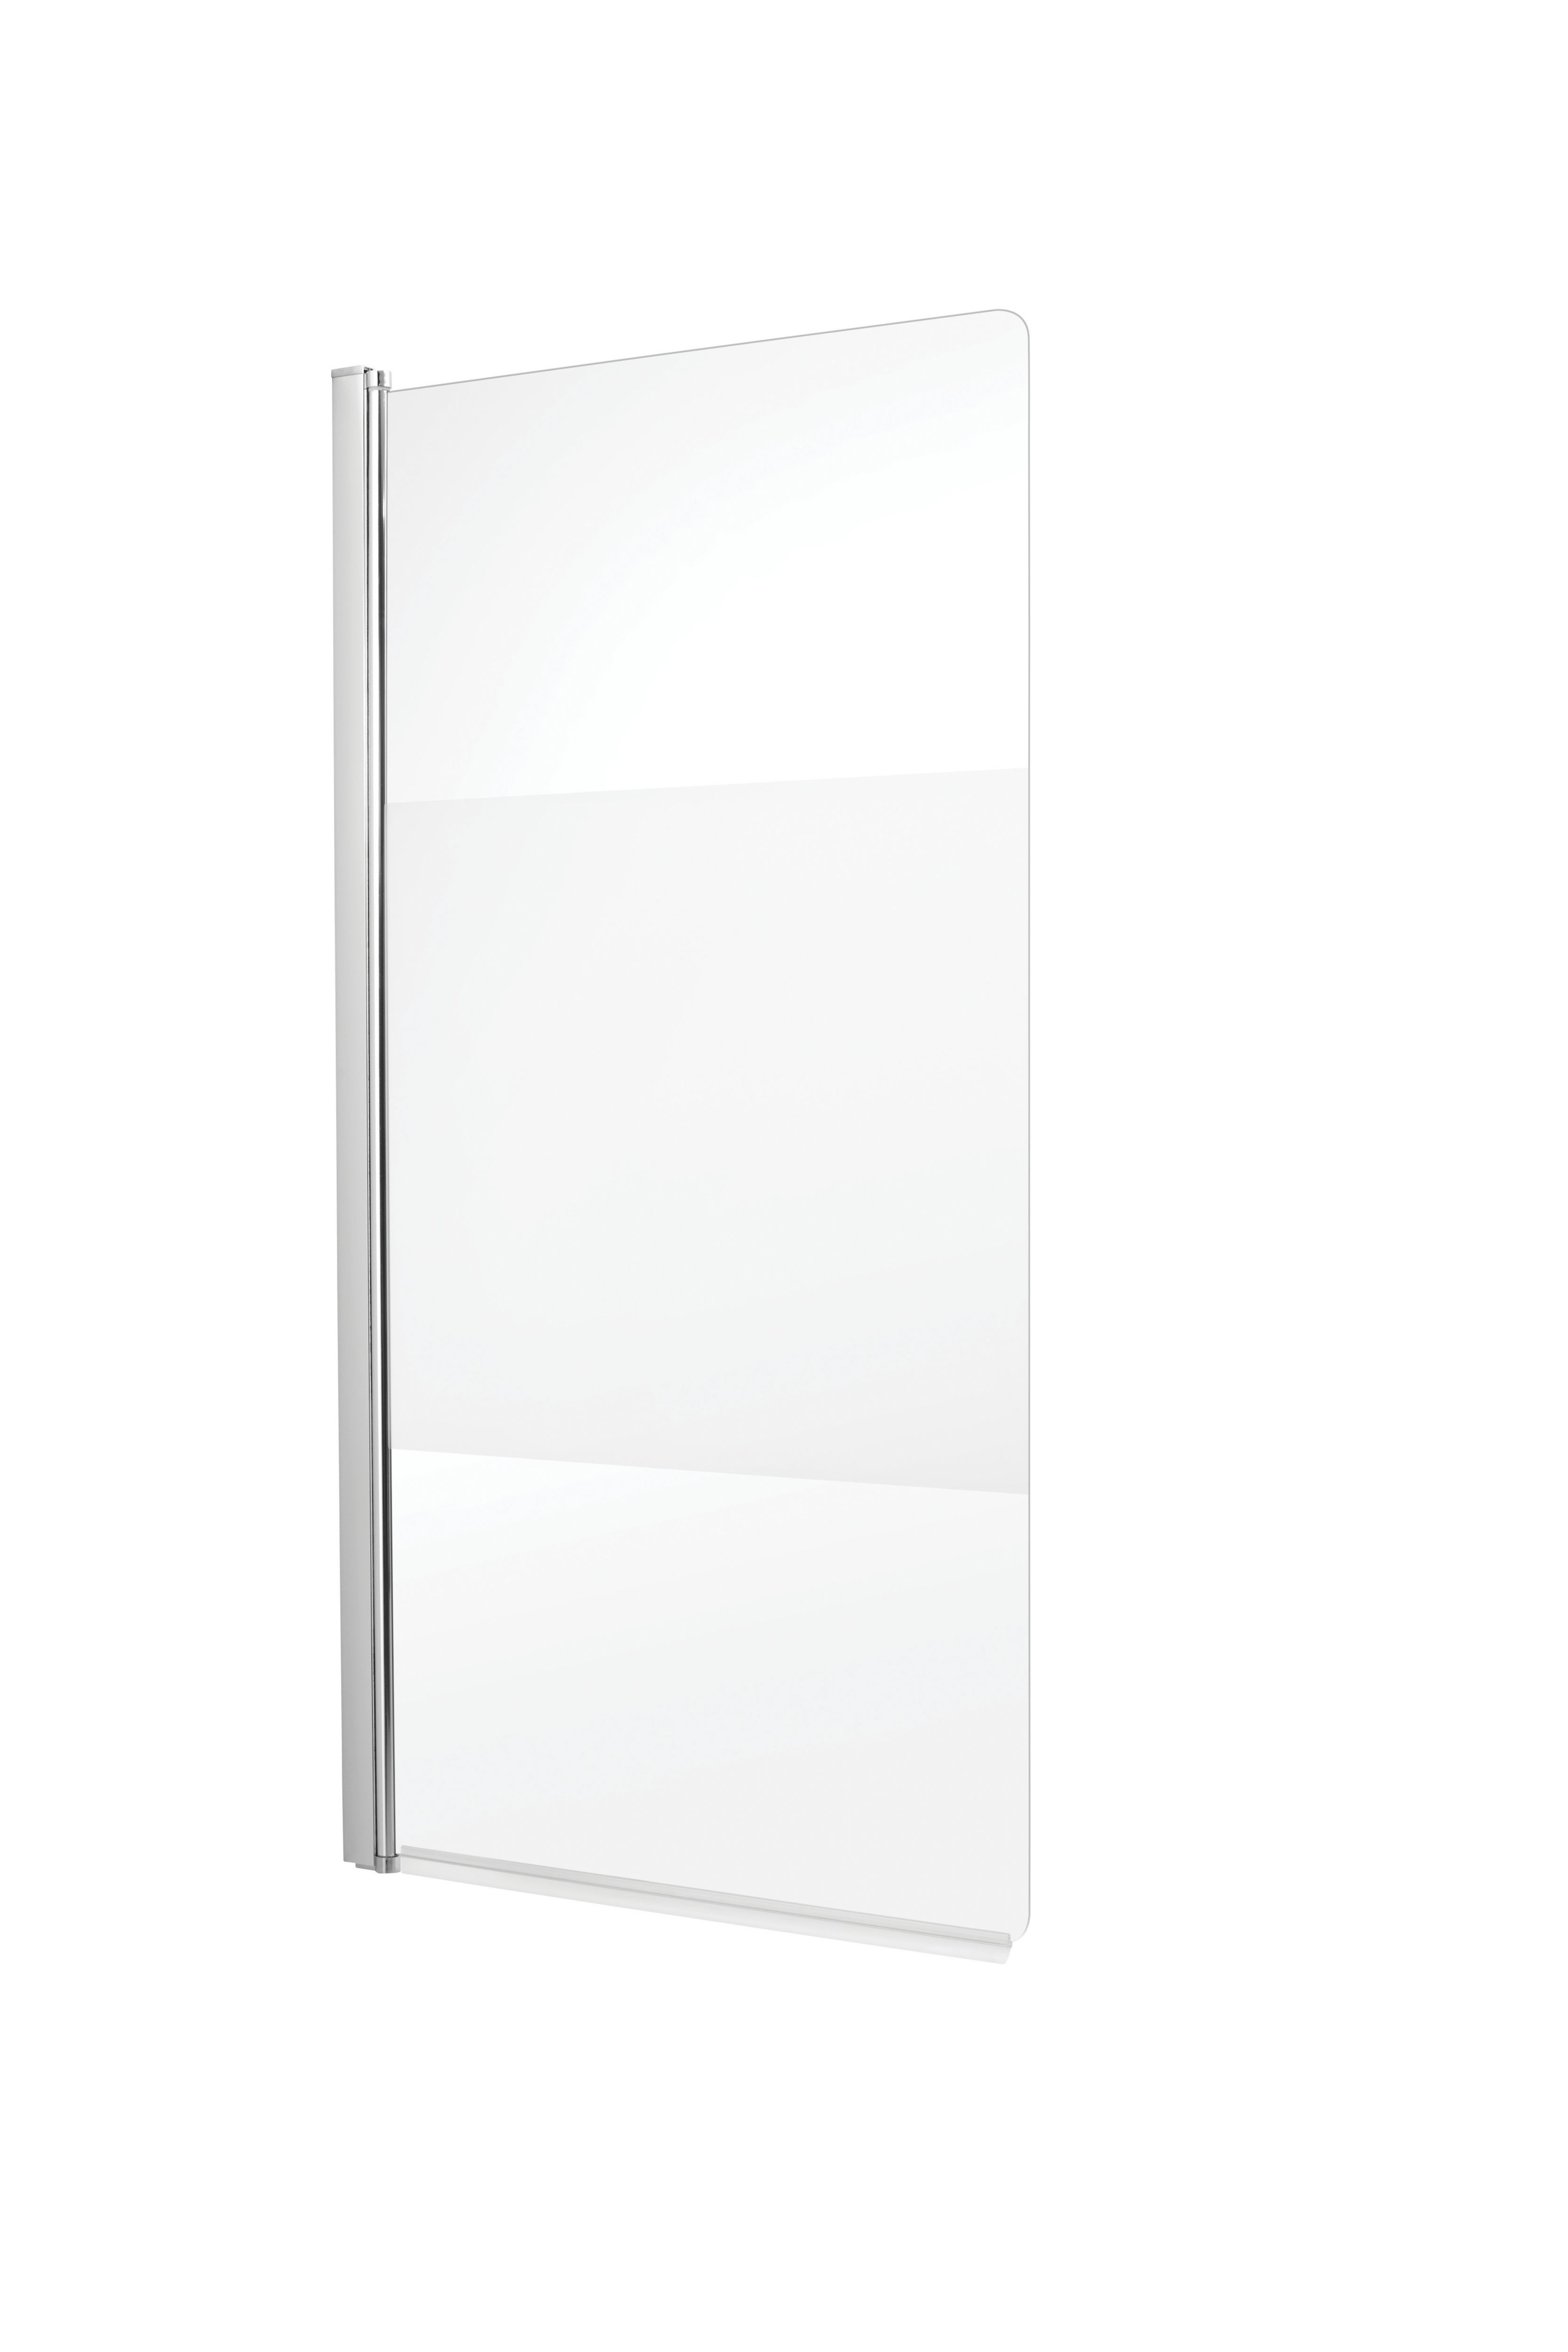 Image of Wickes Chrome with Modesty Panel Half Frame Bath Screen - 1400 x 750mm